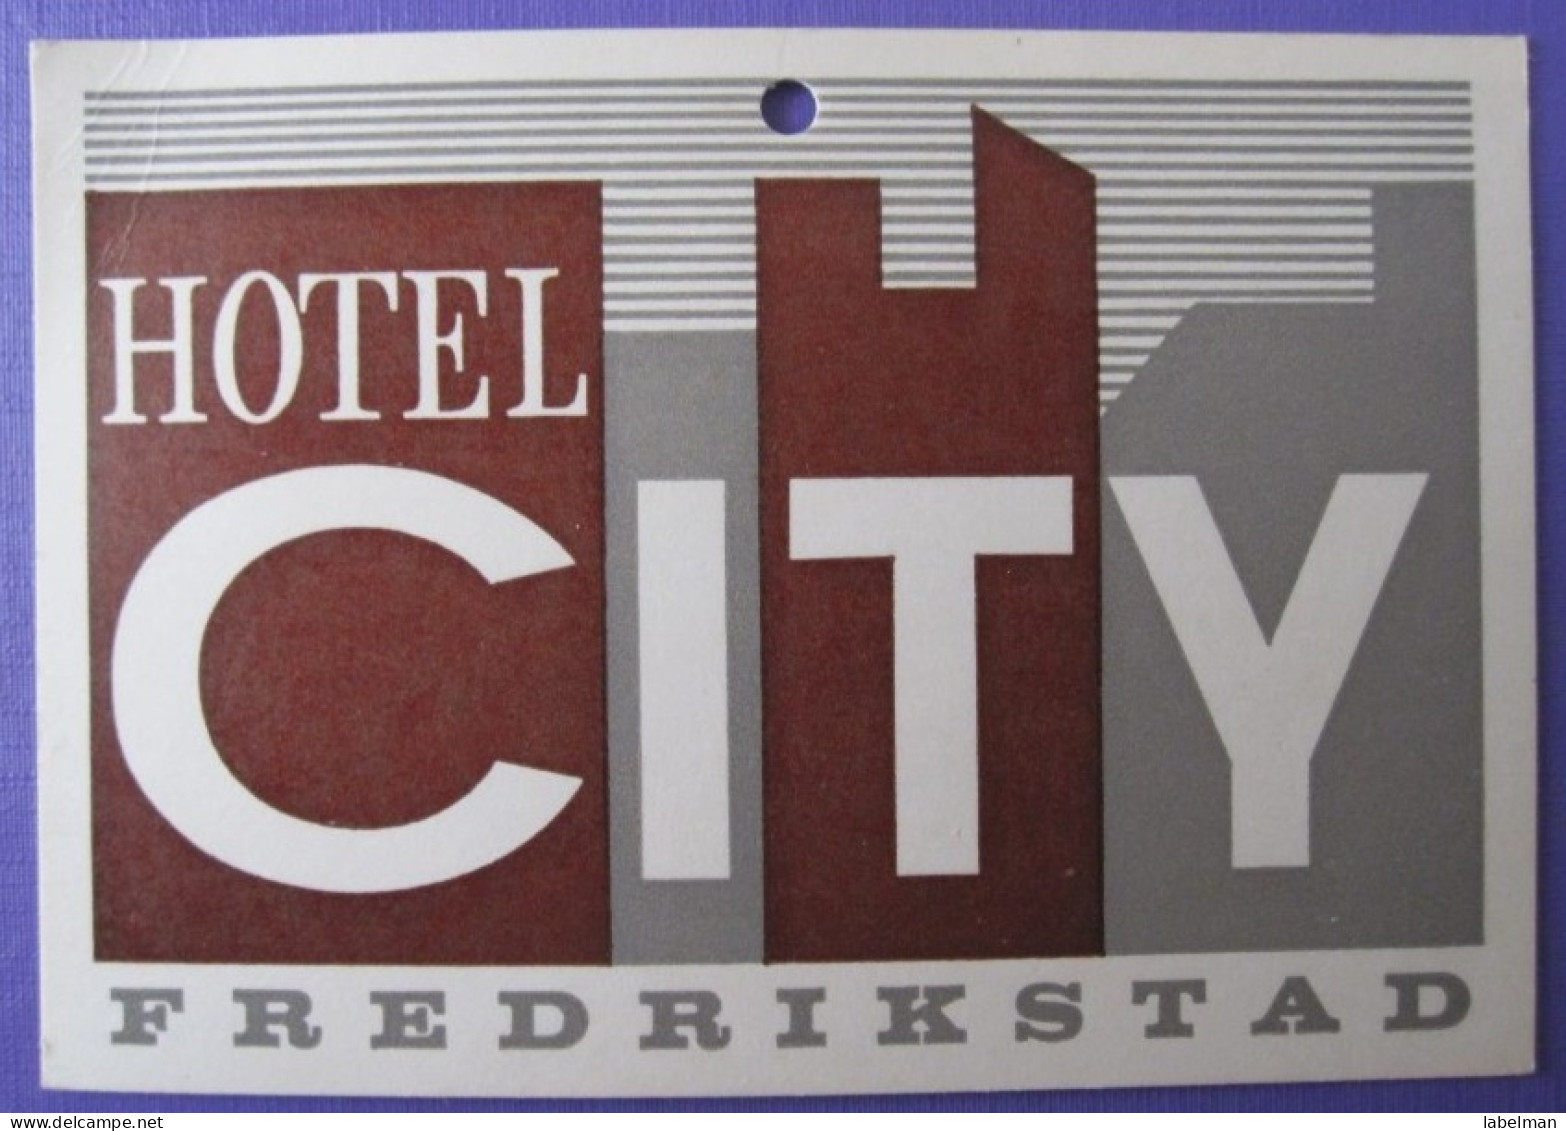 HOTEL HOTELLI HOTELL HOTELLET PENSION CITY FREDRIKSTAD NORVEGE NORWAY NORGE DECAL LUGGAGE LABEL ETIQUETTE AUFKLEBER - Hotel Labels